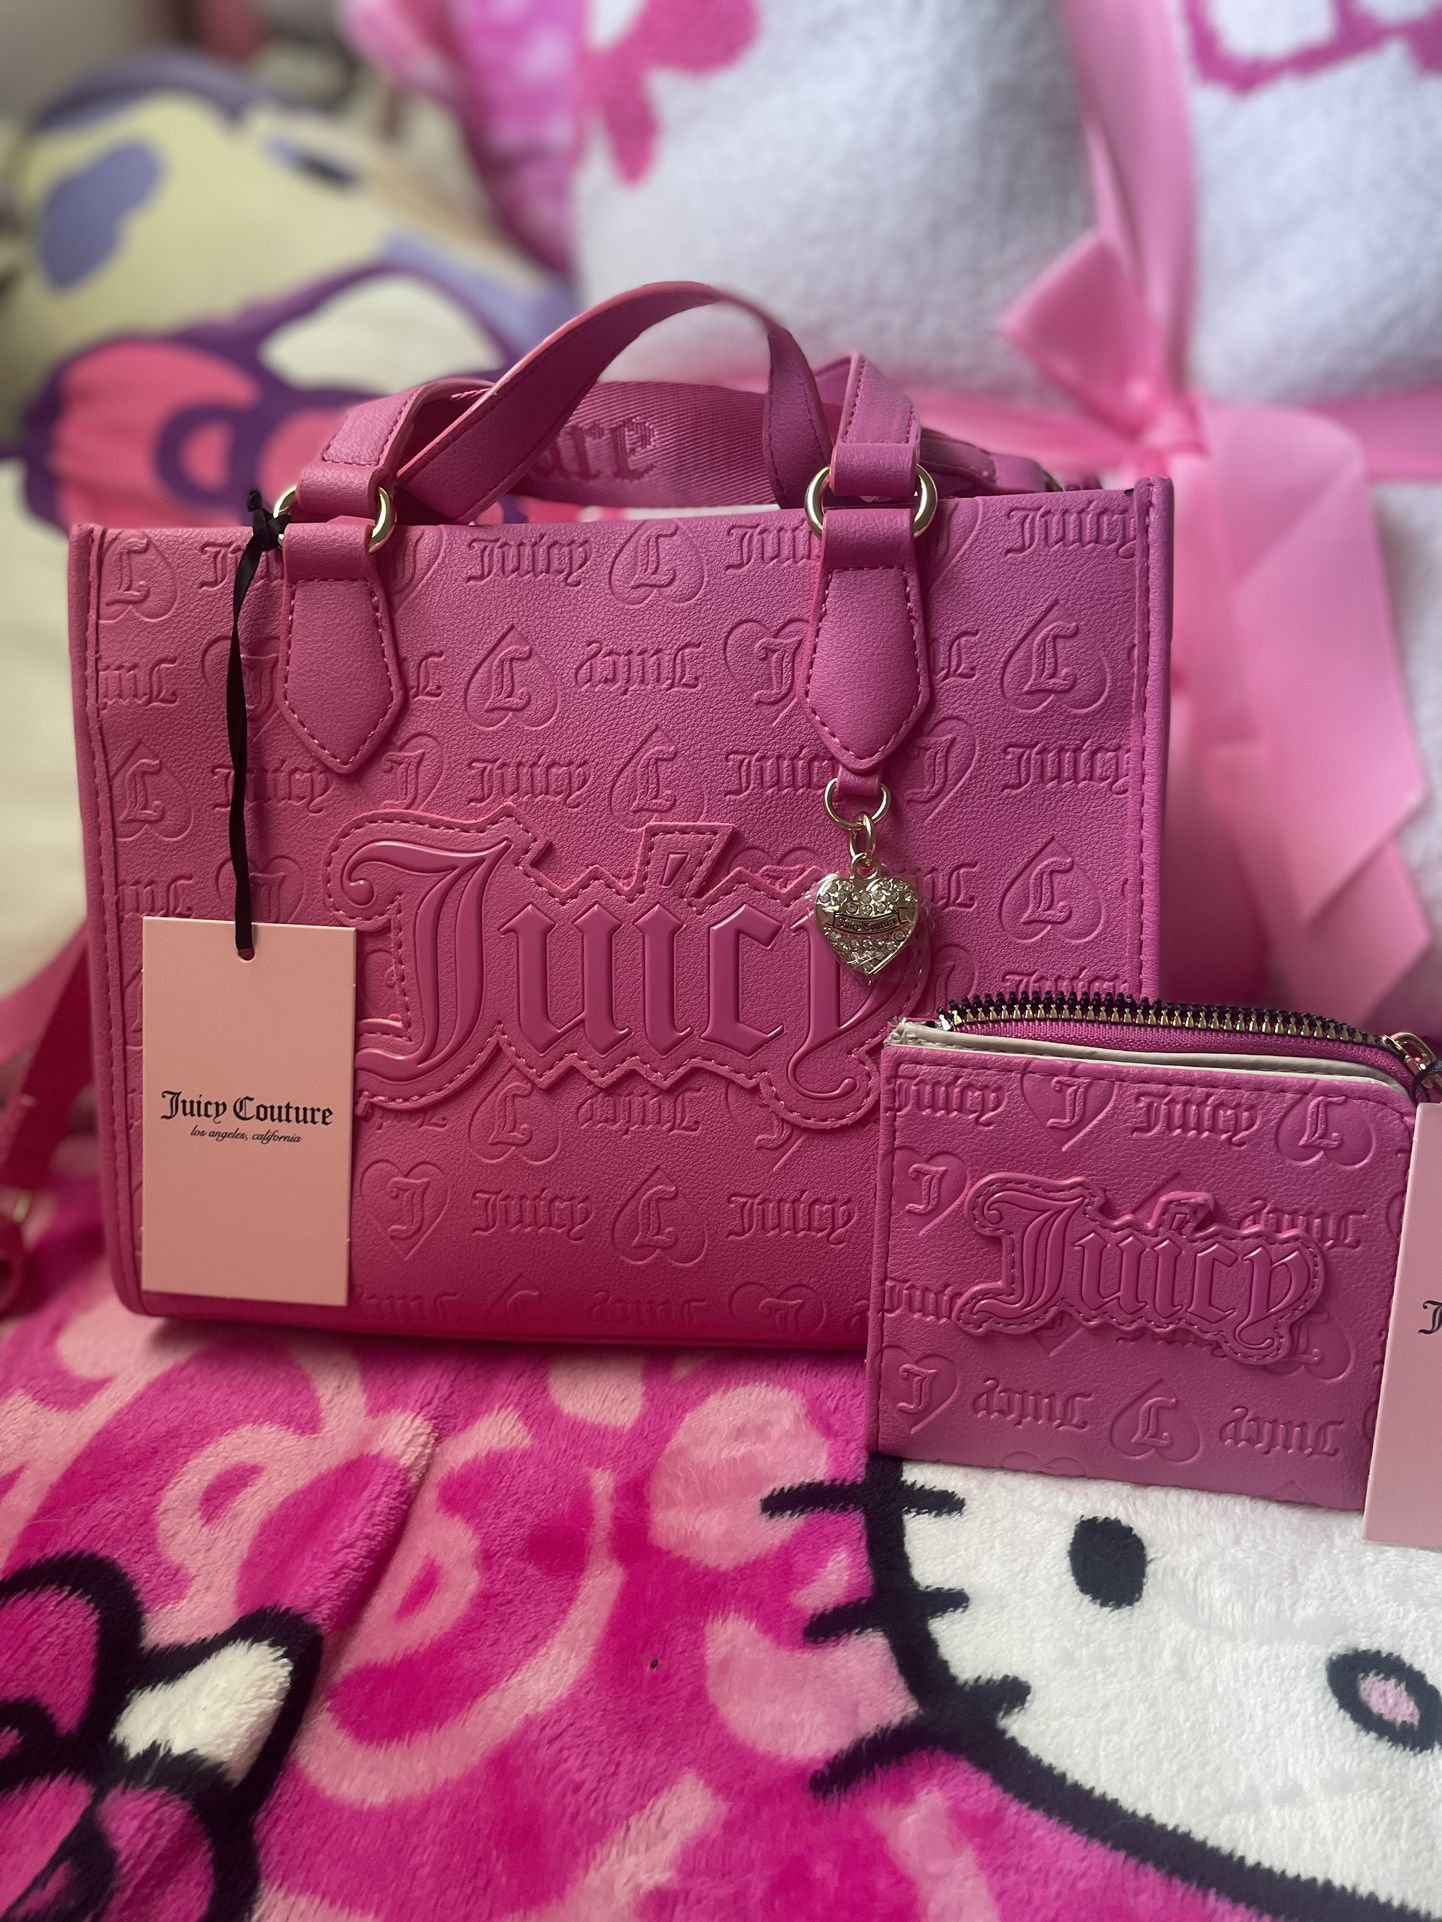 Juicy Couture Purse And Wallet